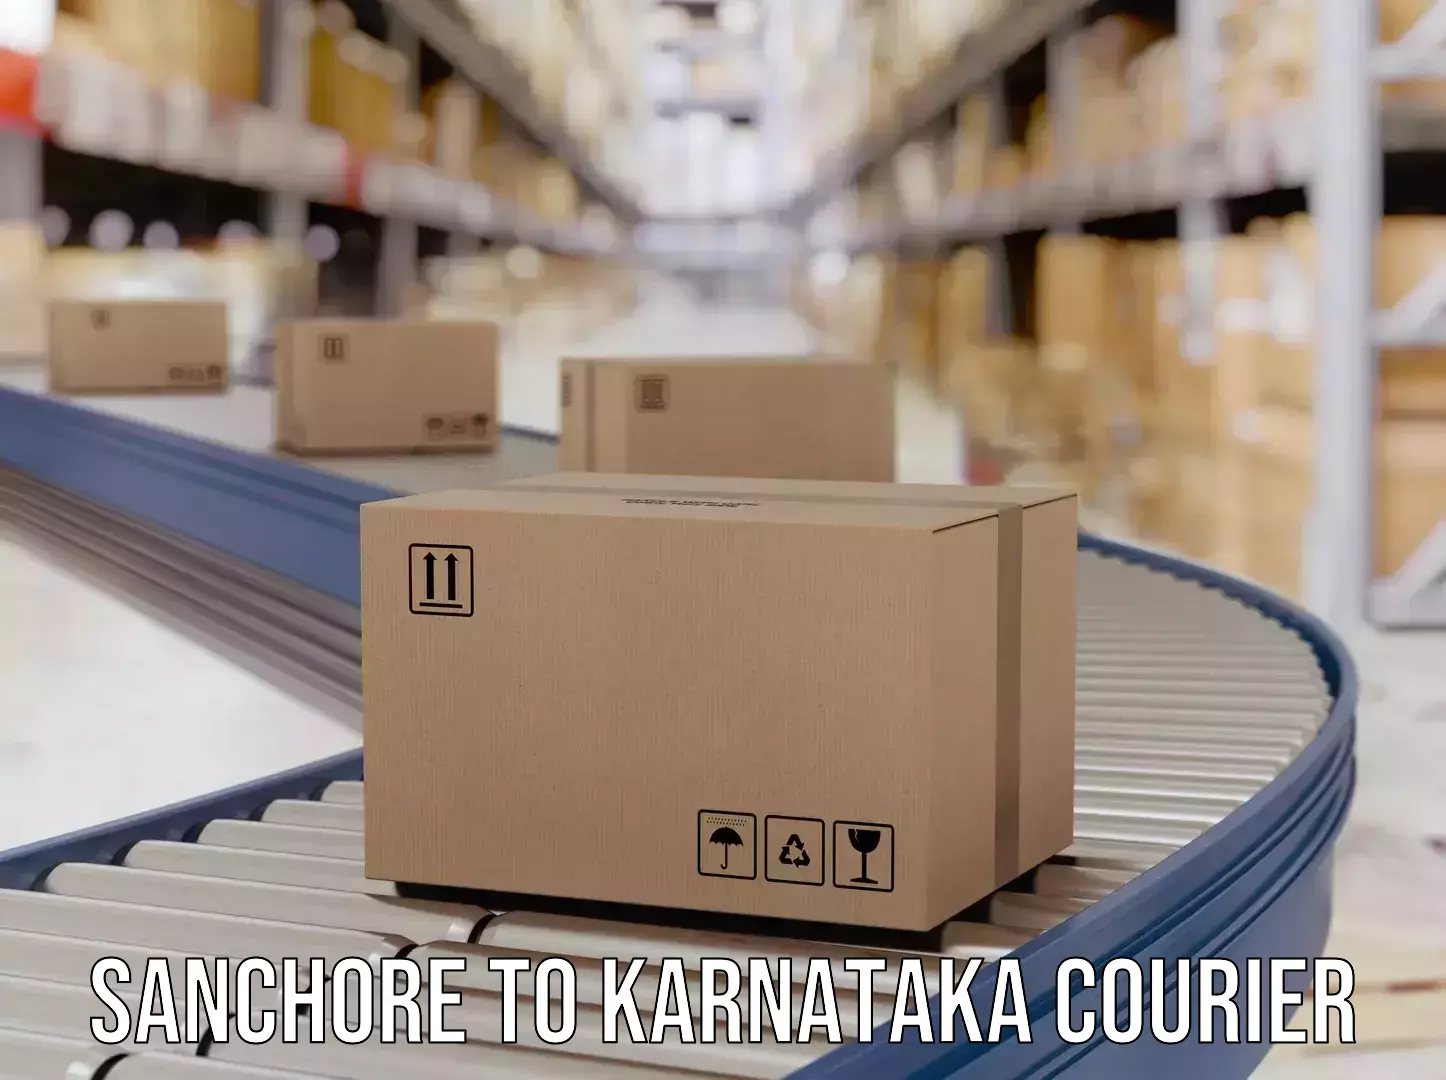 Nationwide shipping coverage in Sanchore to Mandya